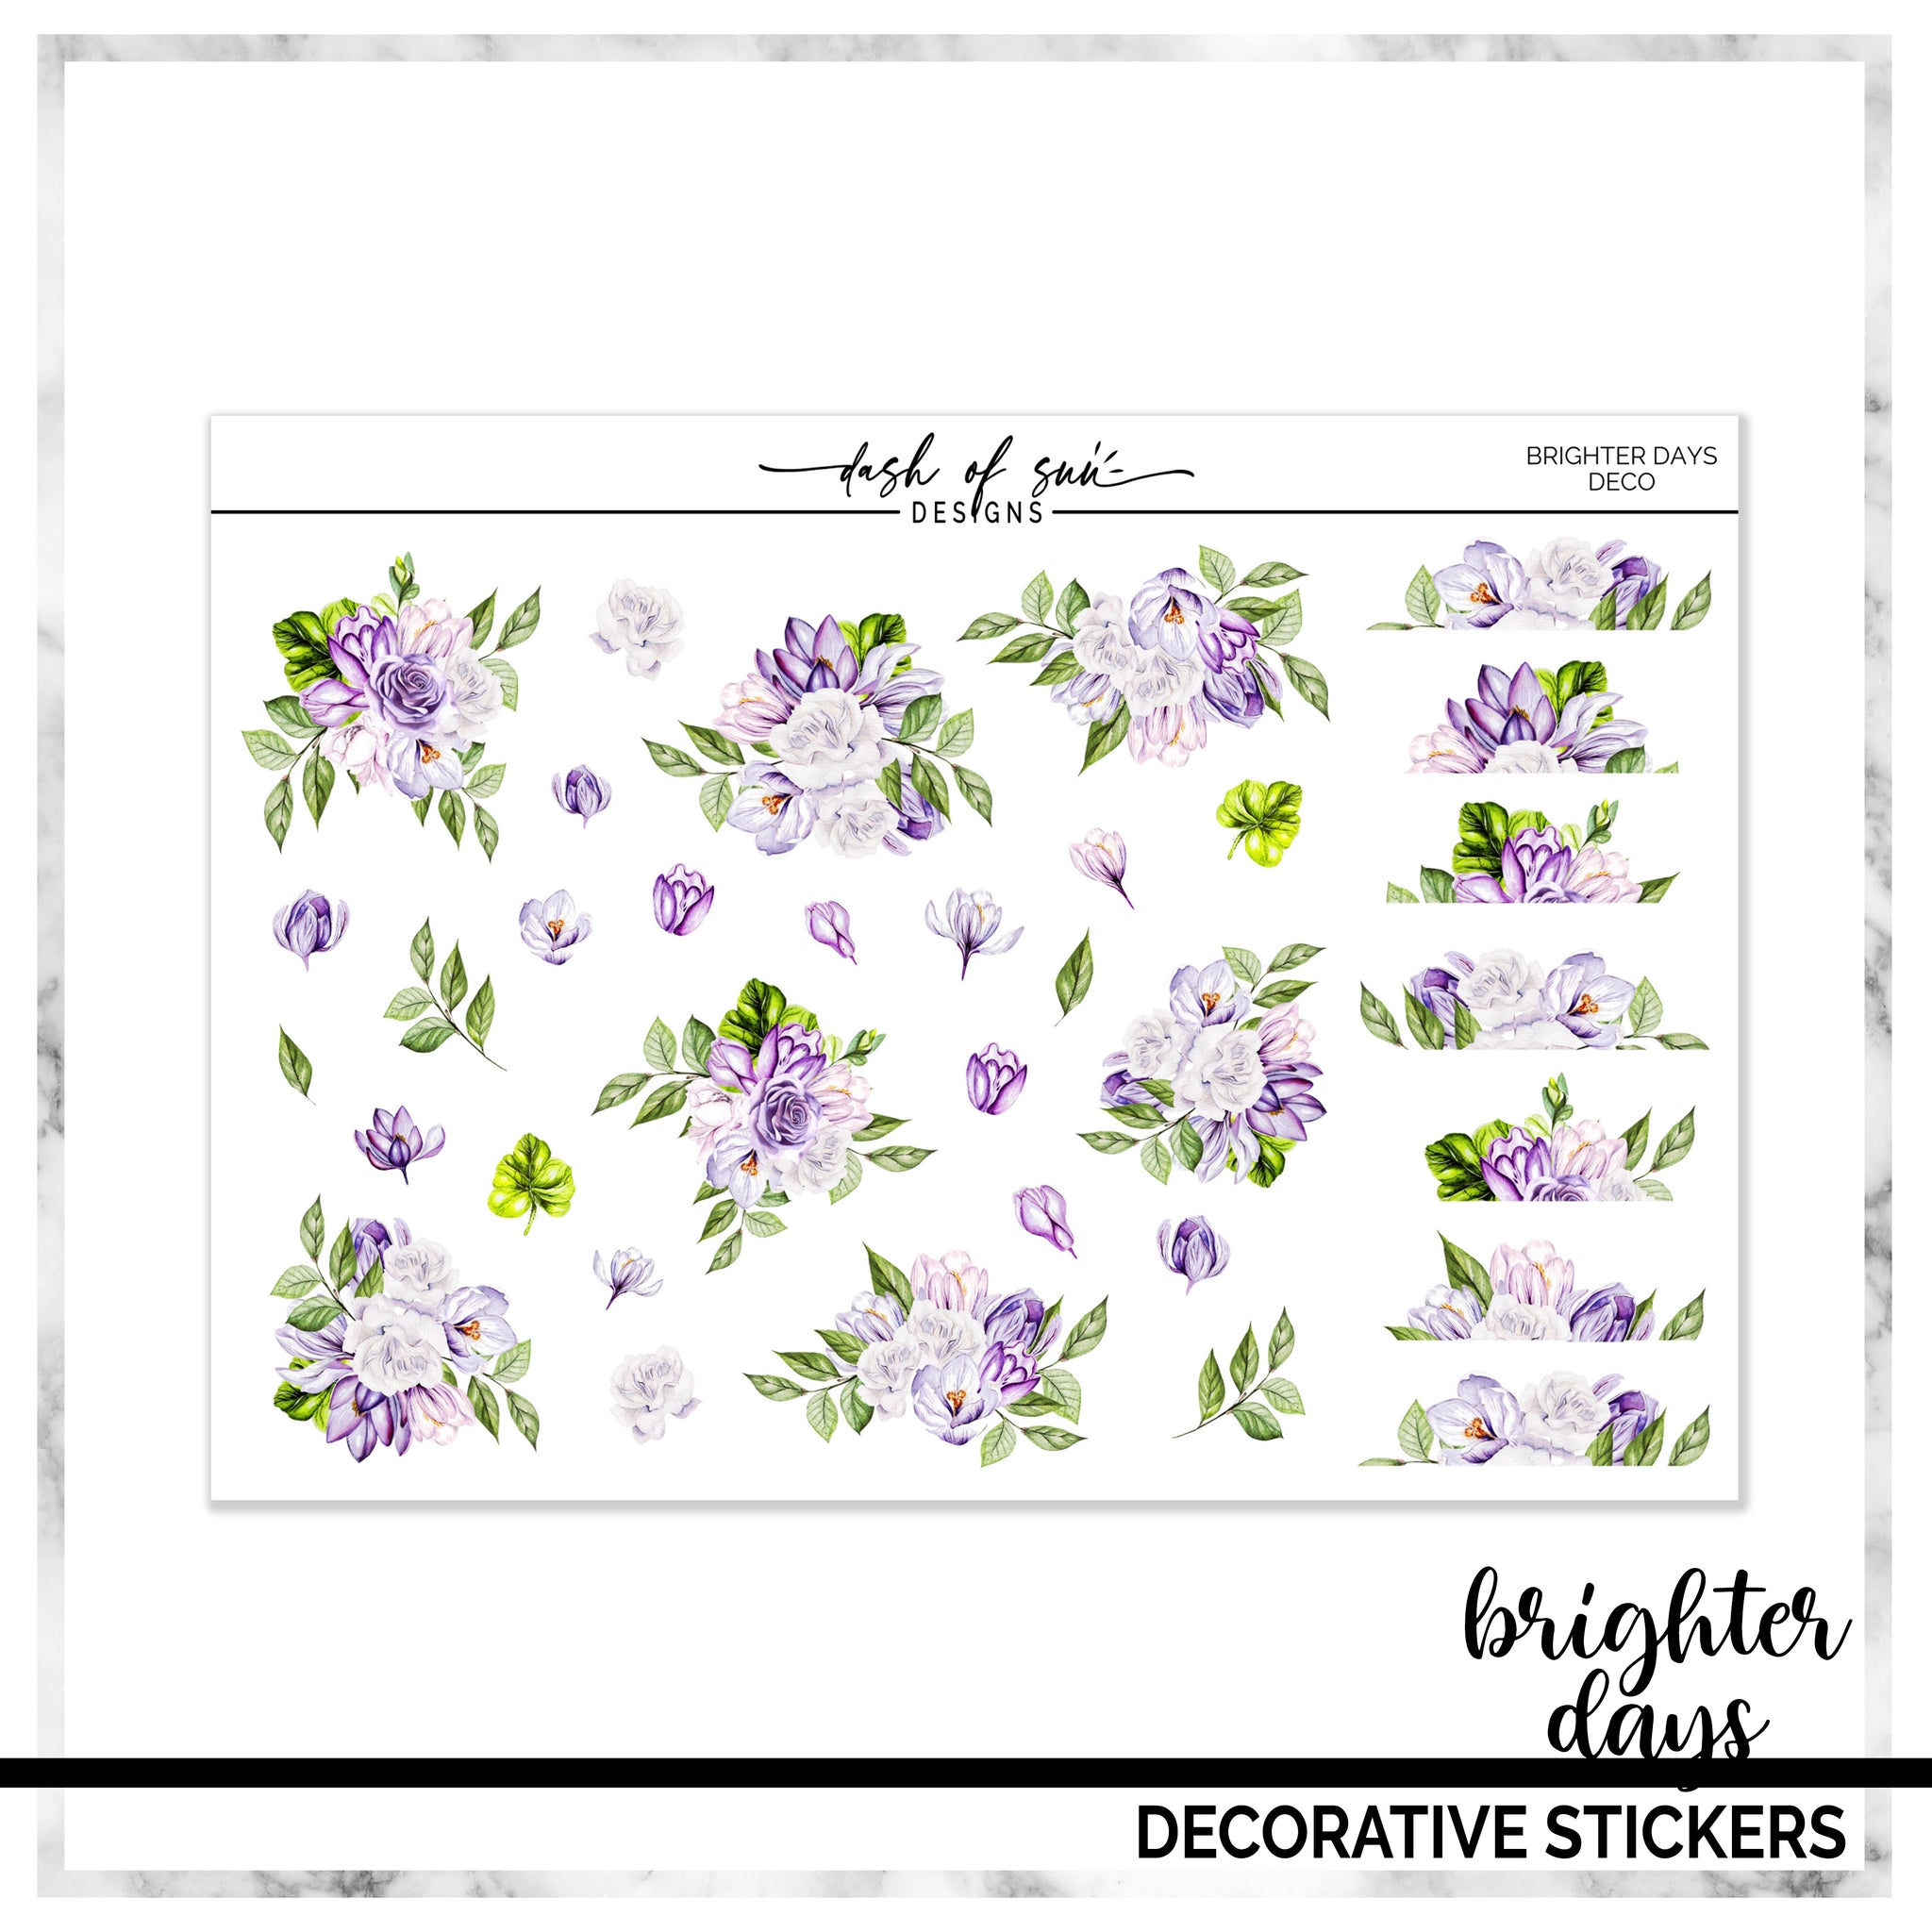 Brighter days | Full Sheet of Decorative Stickers